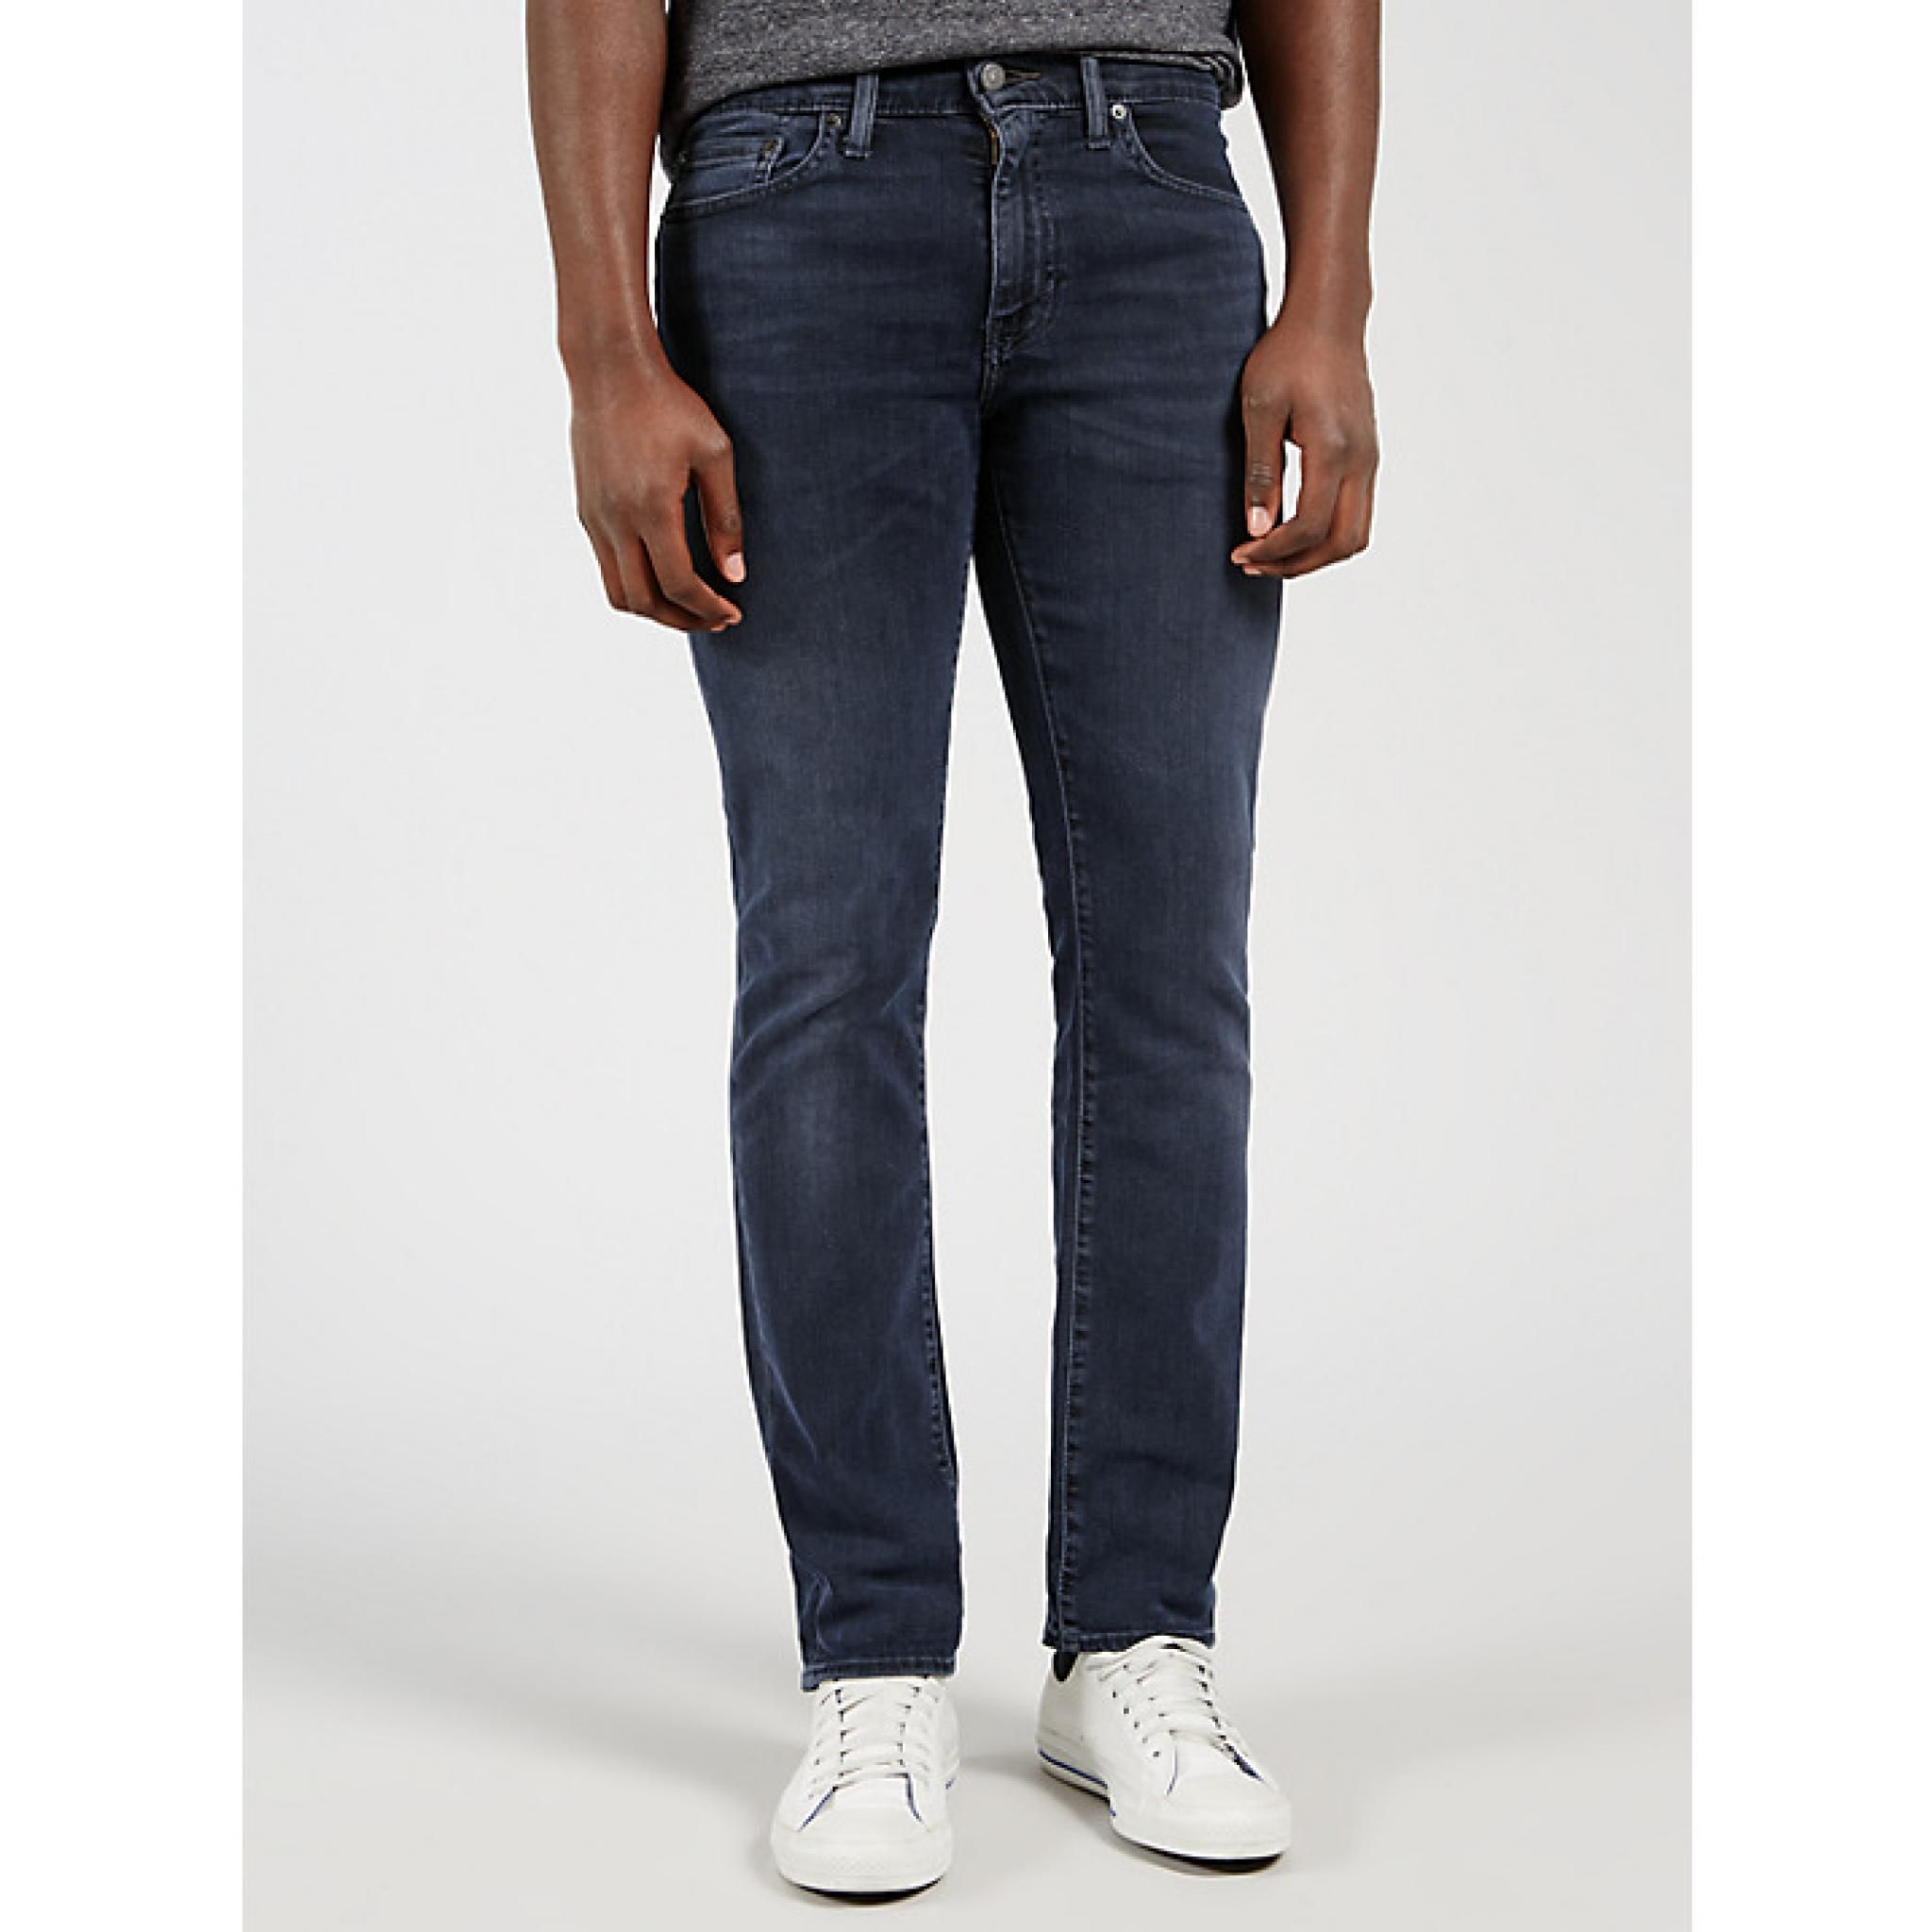 Levi's 511 Slim Fit Jeans, Headed South